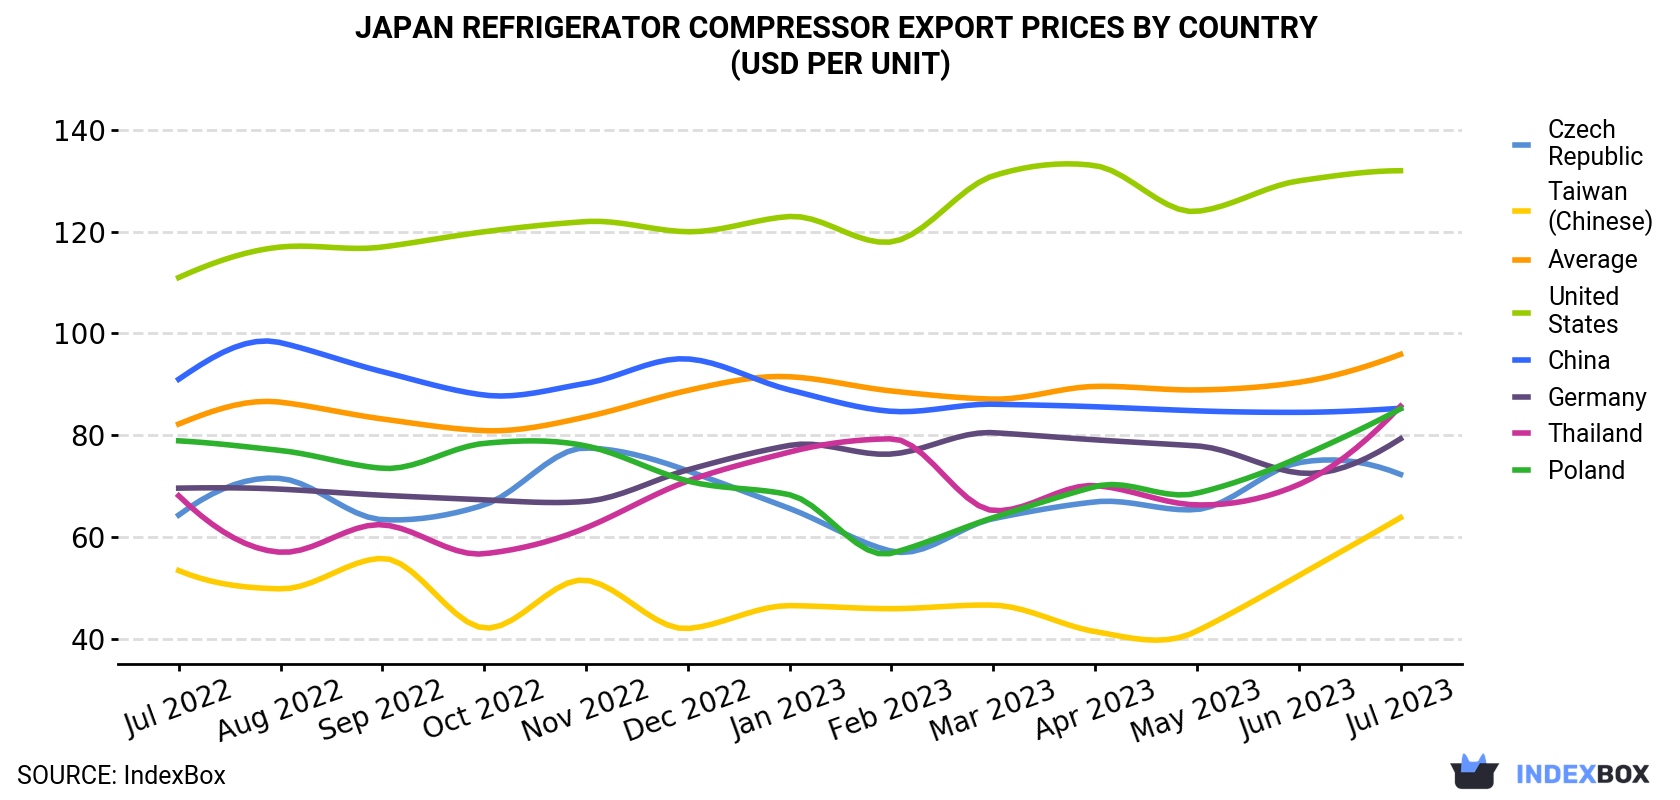 Japan Refrigerator Compressor Export Prices By Country (USD Per Unit)